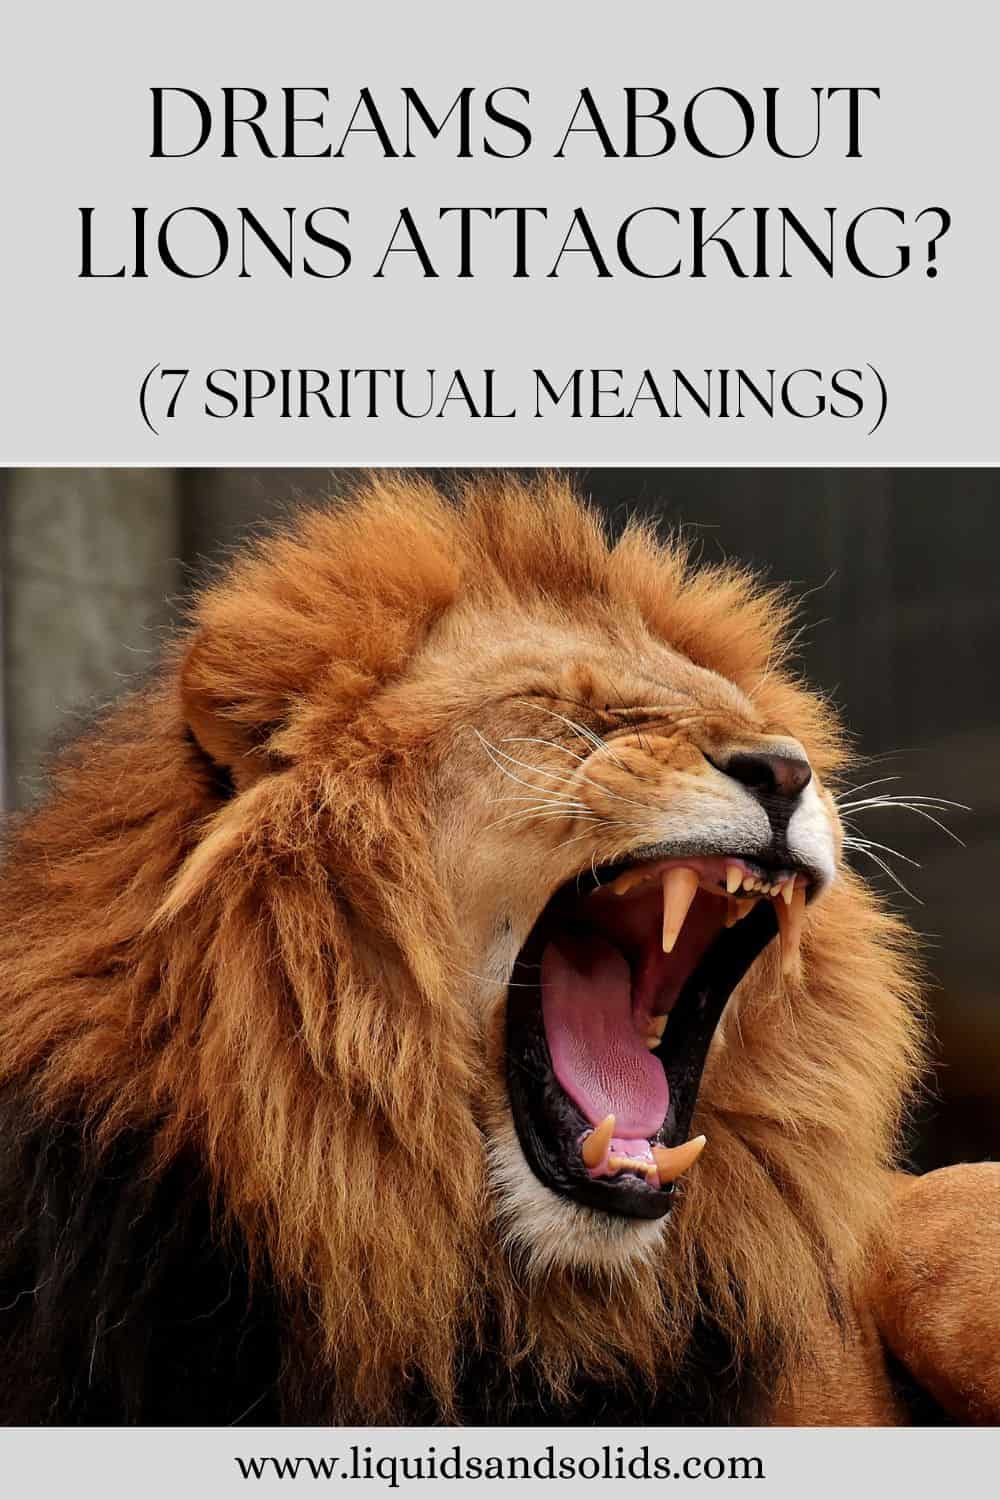 Dreams About Lions Attacking? (7 Spiritual Meanings)